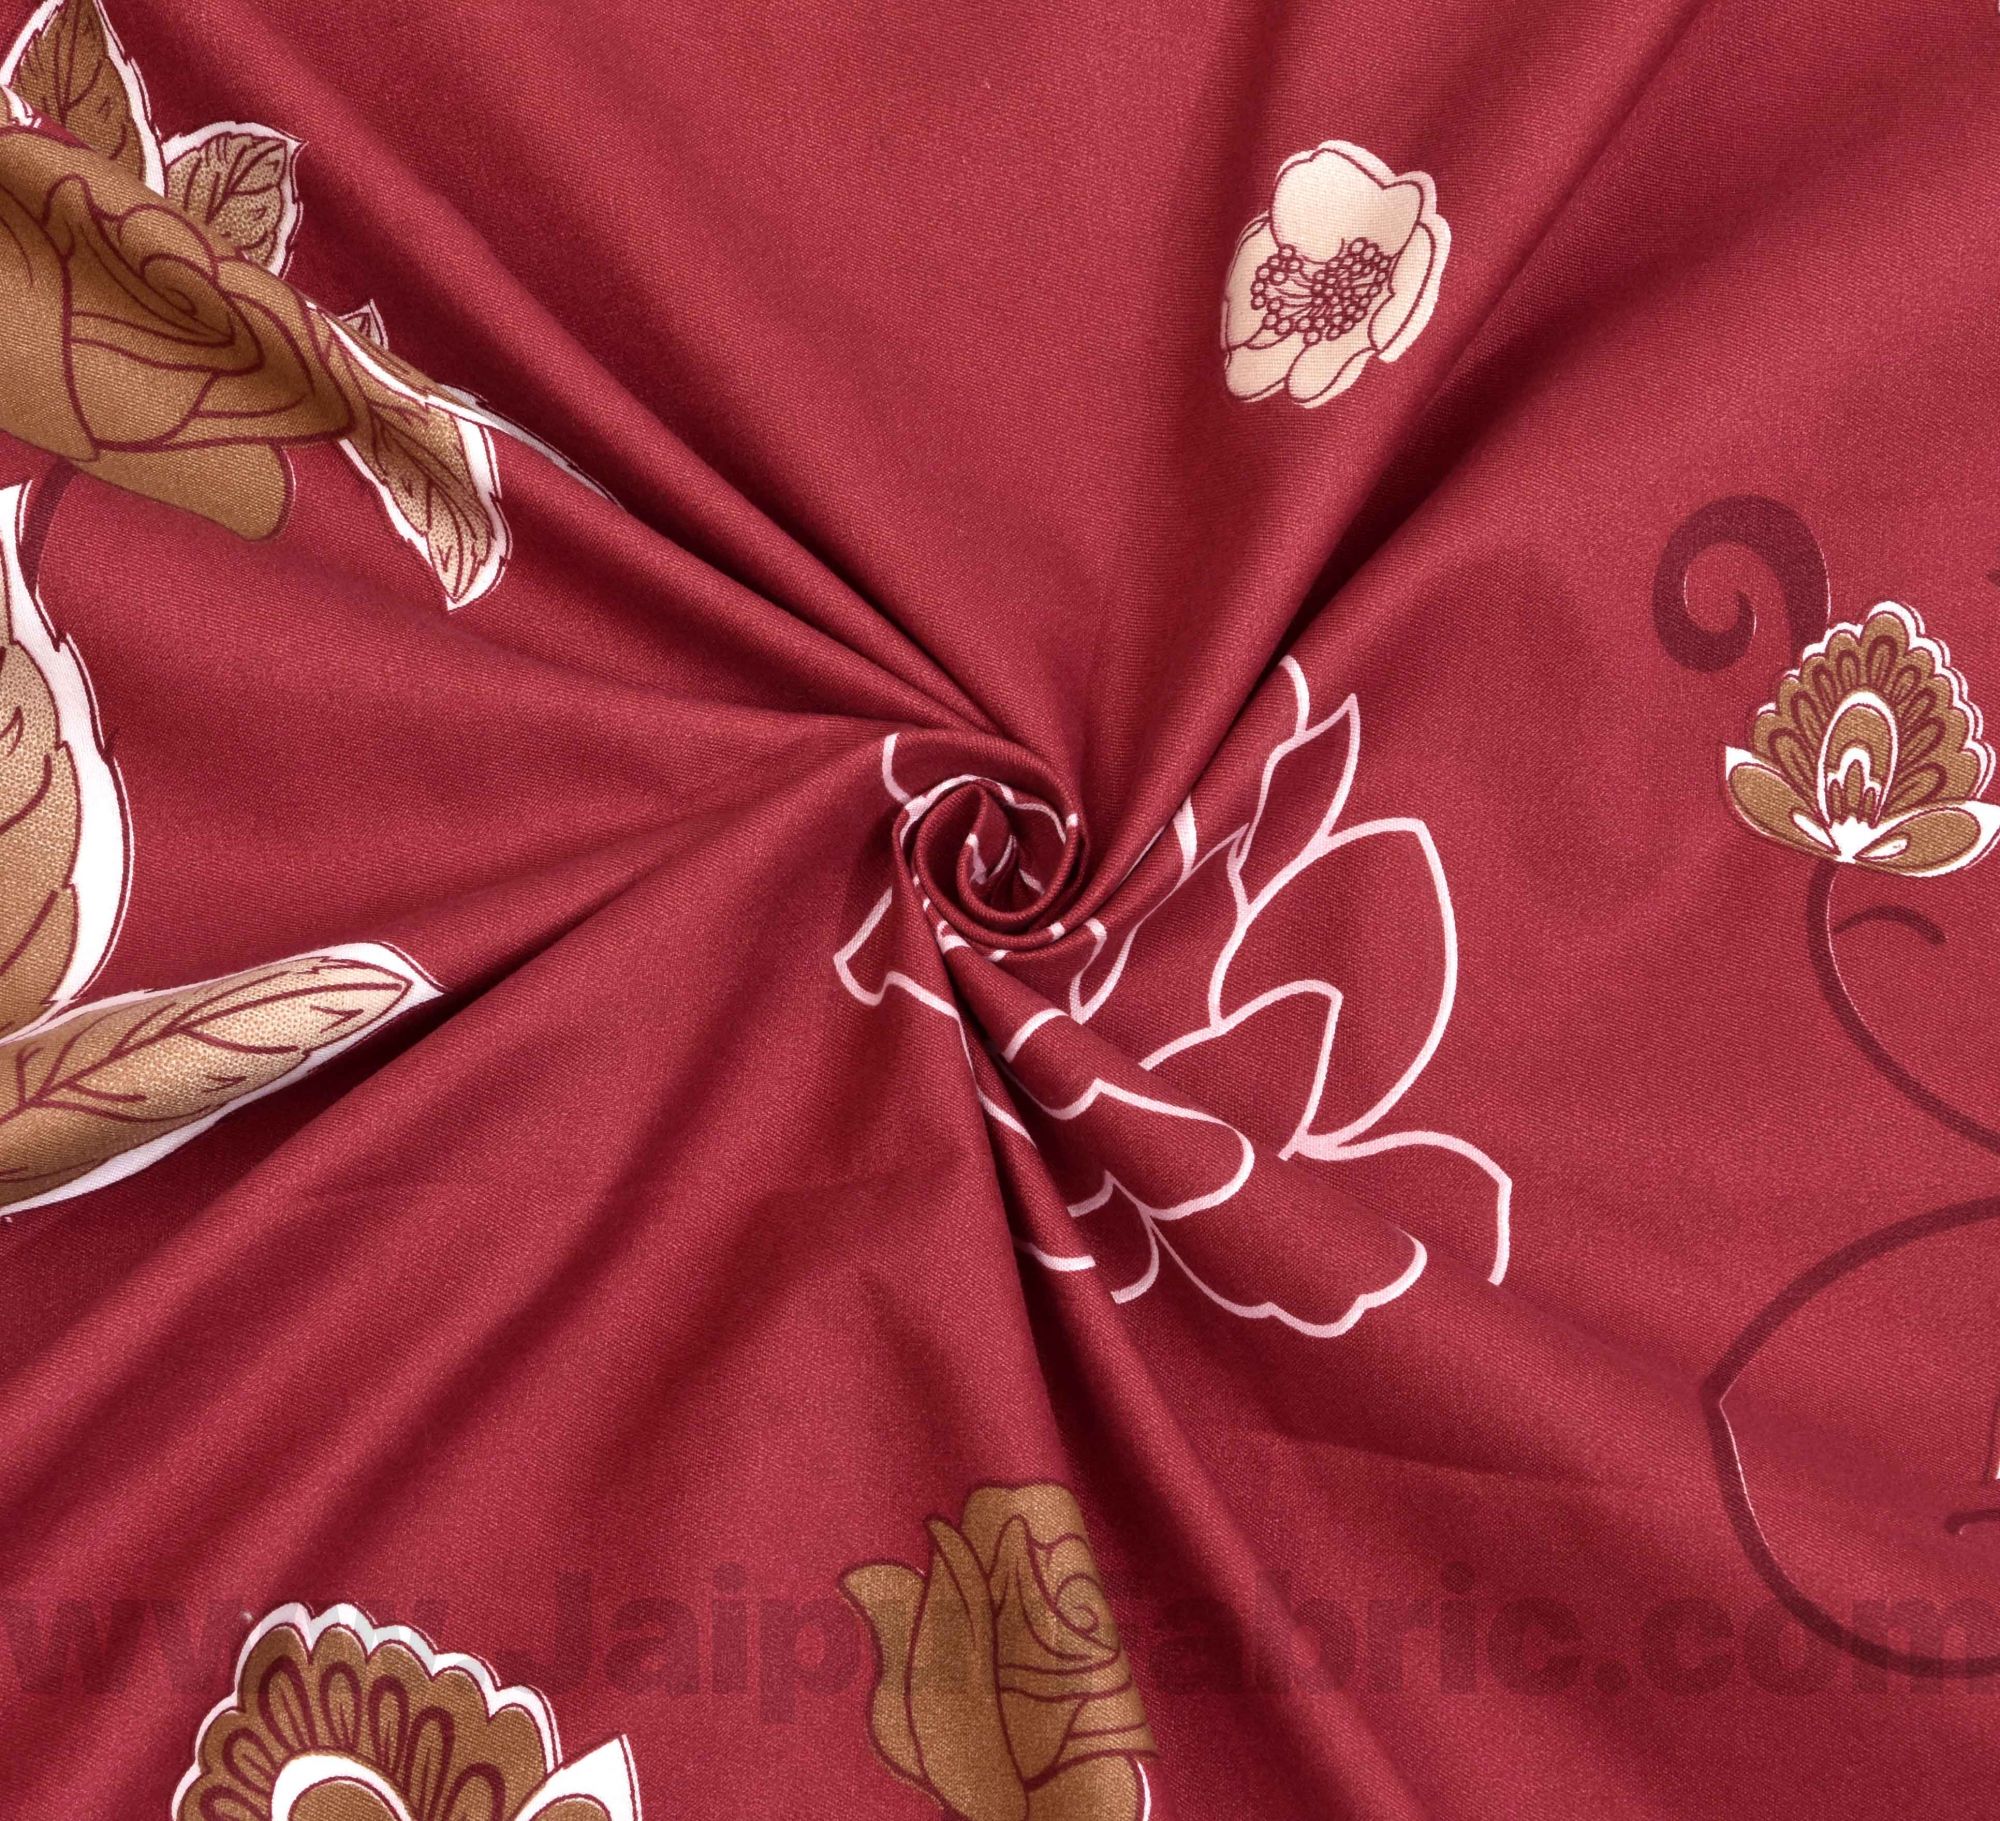 Blood Red Super Soft Double Bedsheet